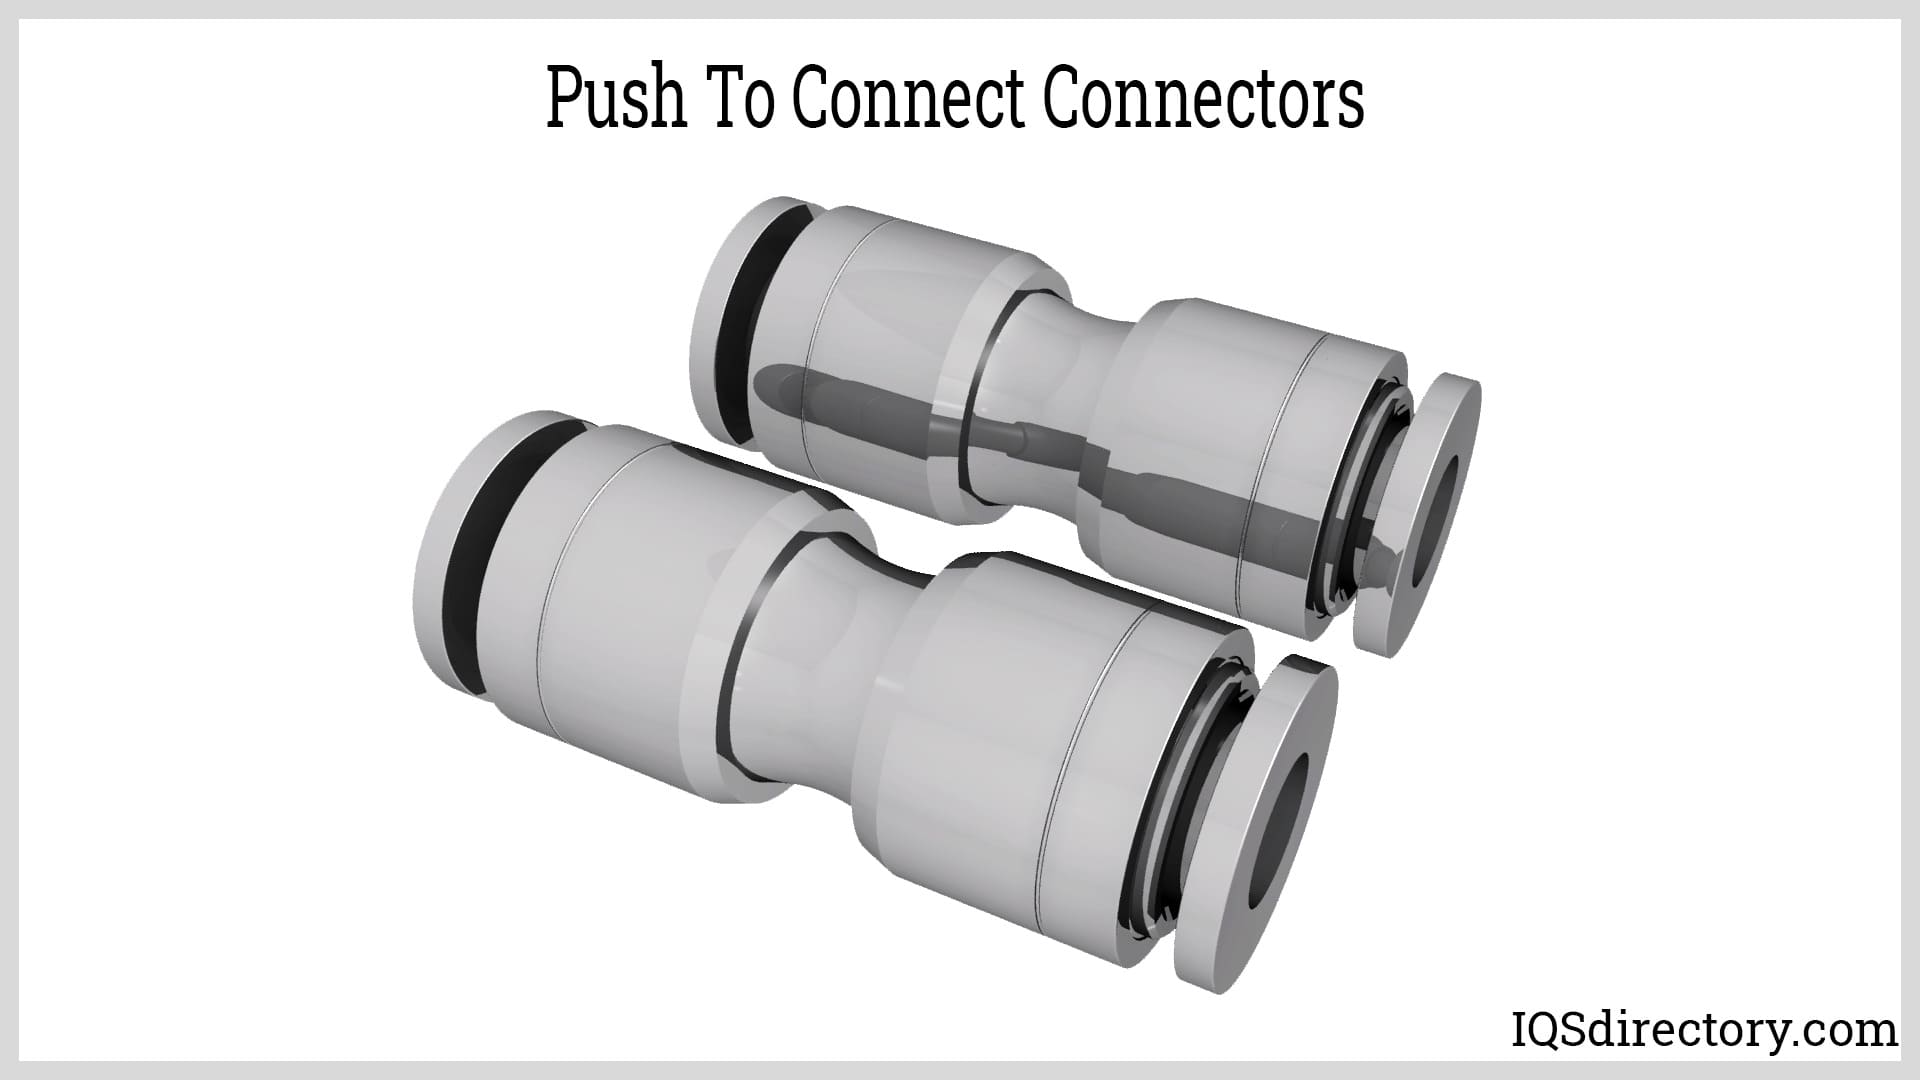 Push To Connect Connectors